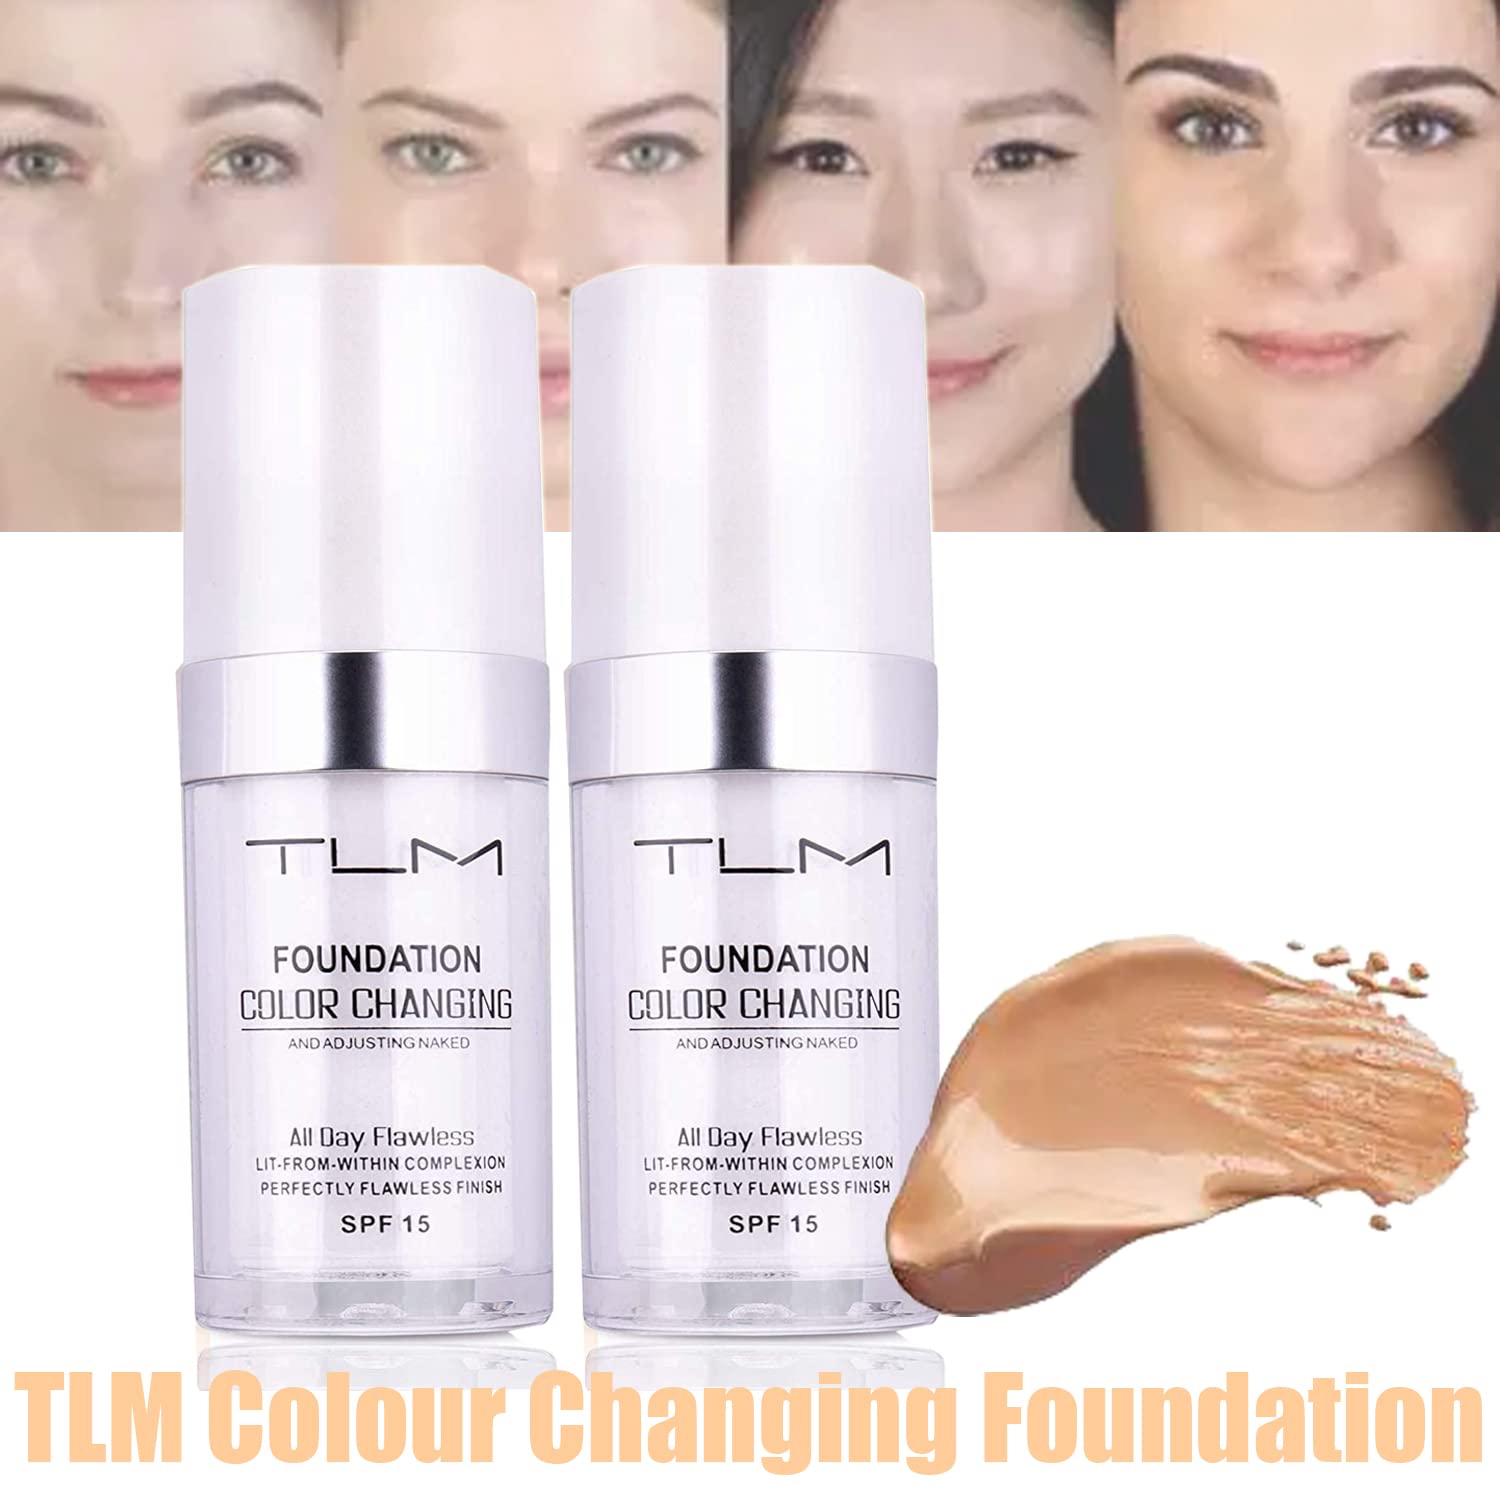 2Pcs 30ml TLM Colour Changing Foundation Makeup Concealer Cover Cream Full Coverage Flawless Liquid Base Nude Face Liquid Cover Concealer Change Skin Tone All-Day Moisturizing Foundation for Women&Girls